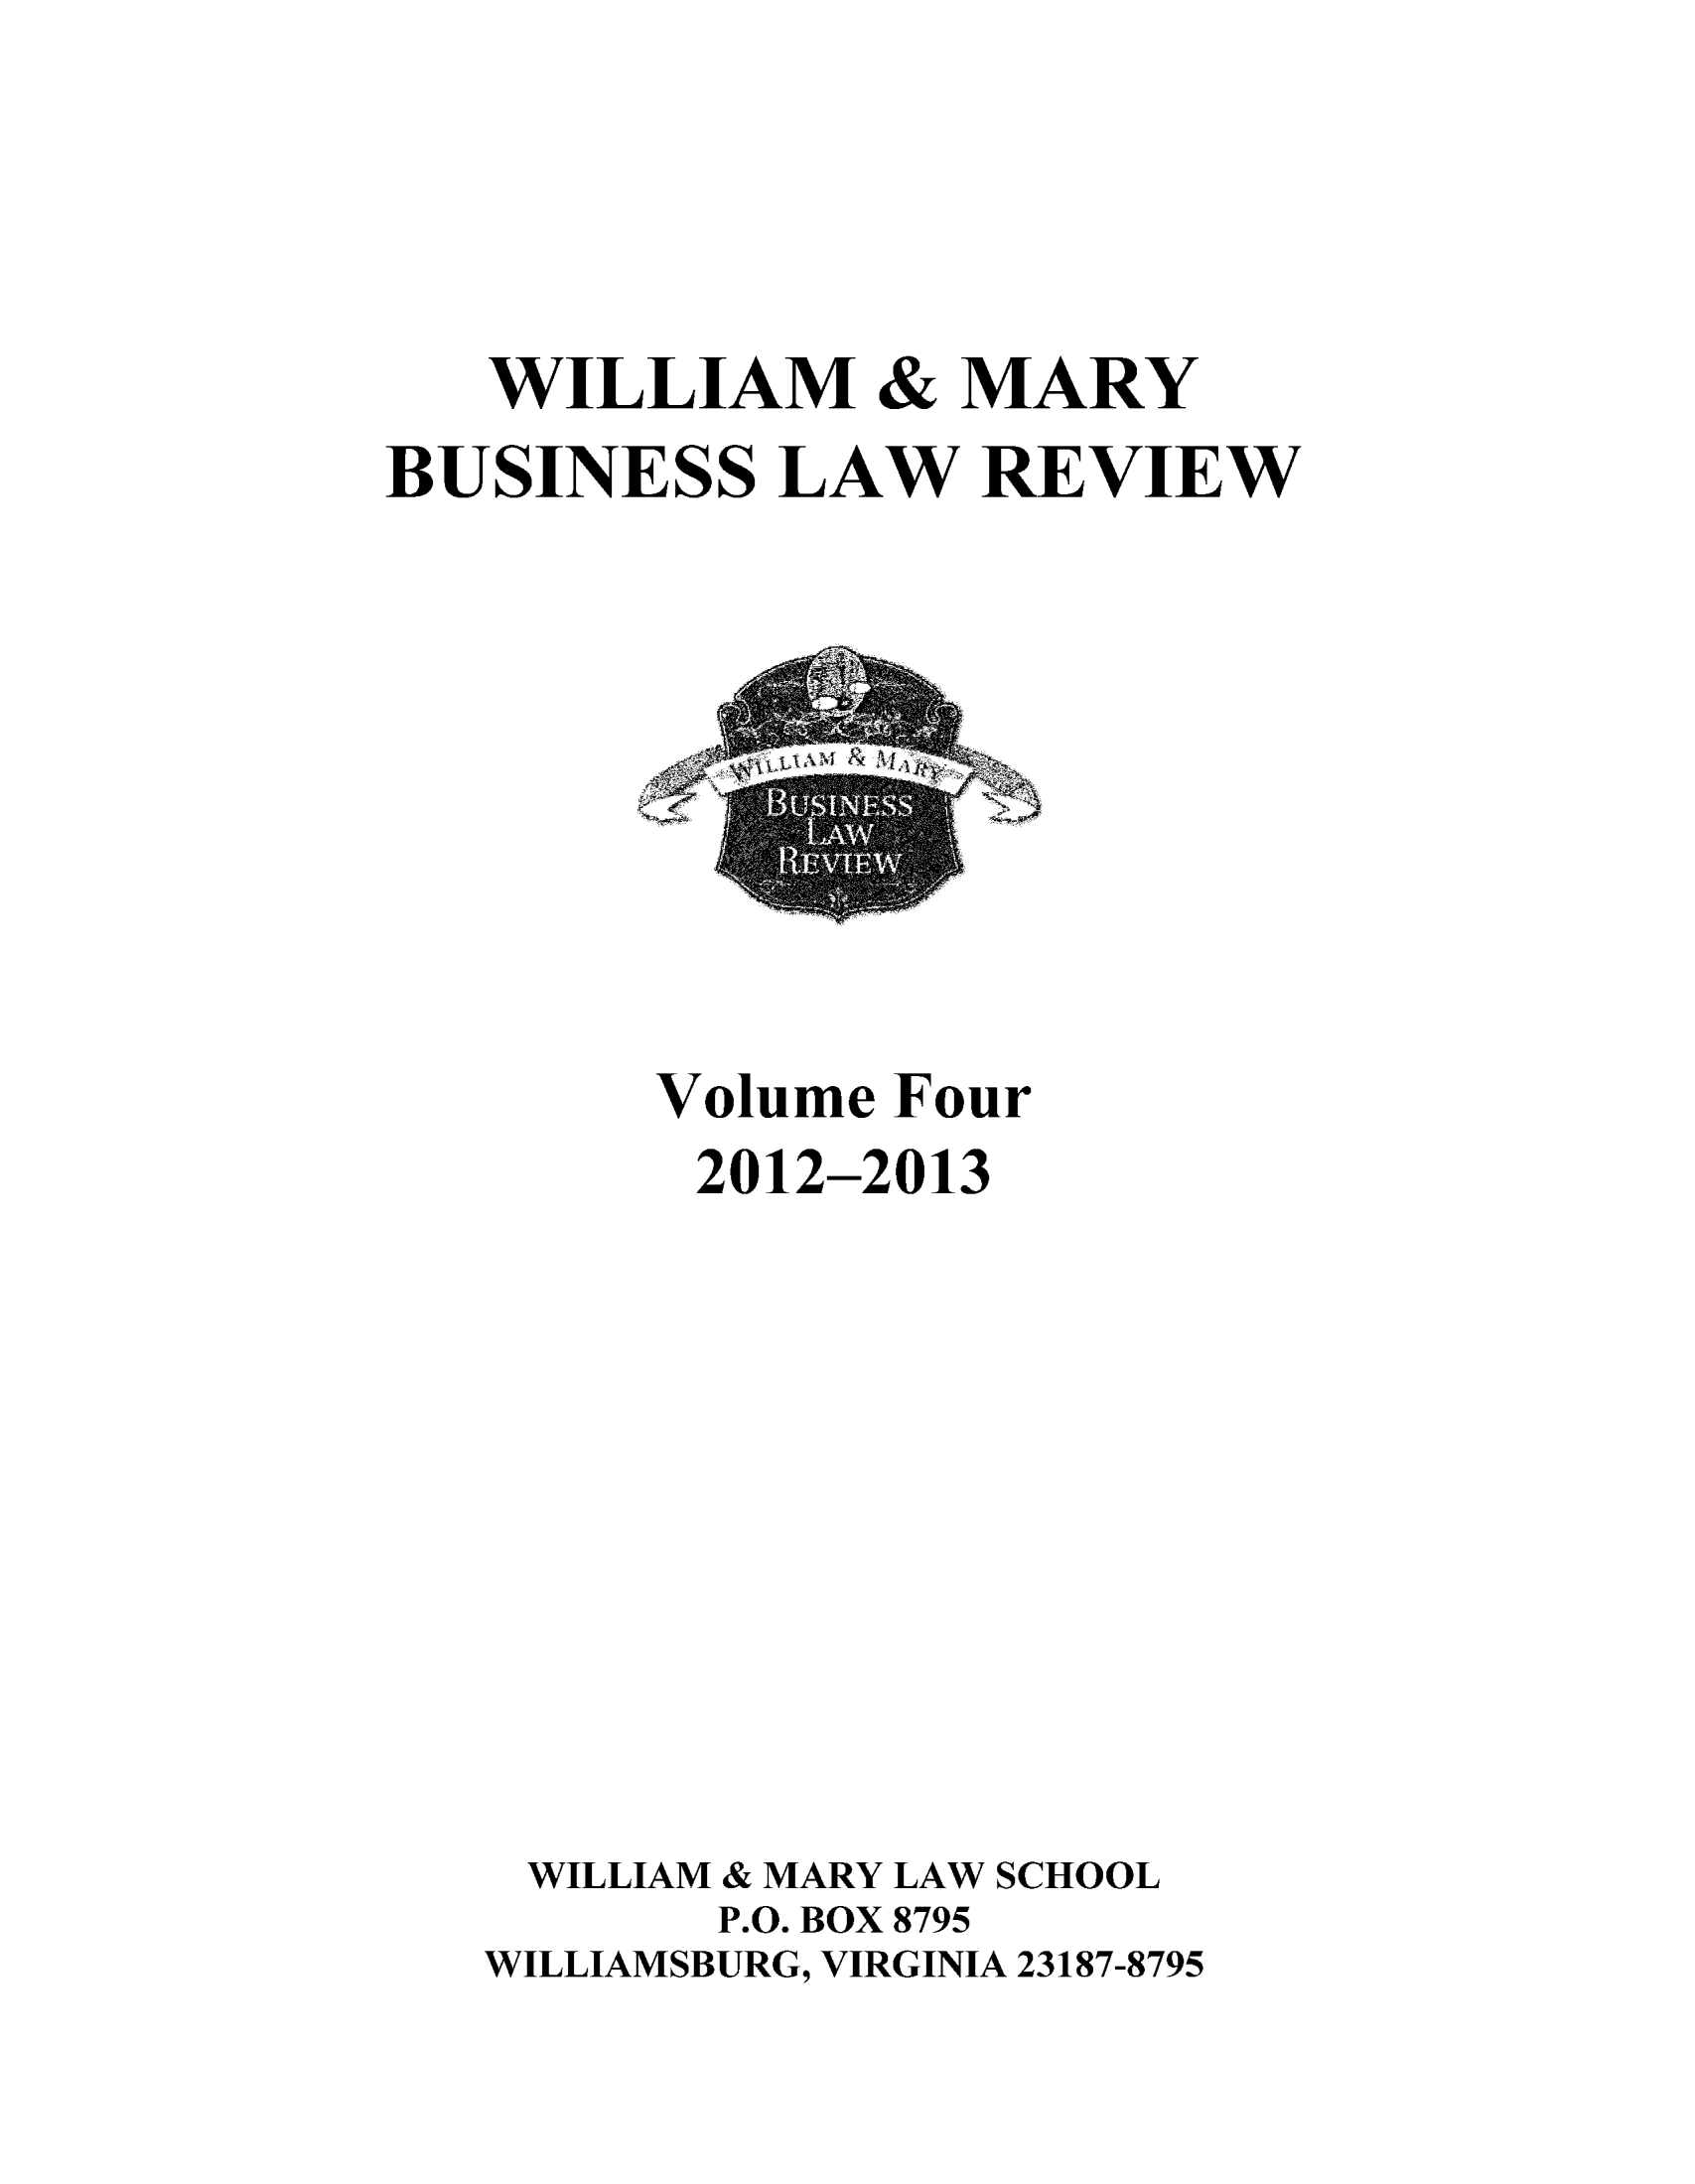 handle is hein.journals/wmaybur4 and id is 1 raw text is: WILLIAM & MARY
BUSINESS LAW REVIEW

Volume Four
2012-2013
WILLIAM & MARY LAW SCHOOL
P.O. BOX 8795
WILLIAMSBURG, VIRGINIA 23187-8795


